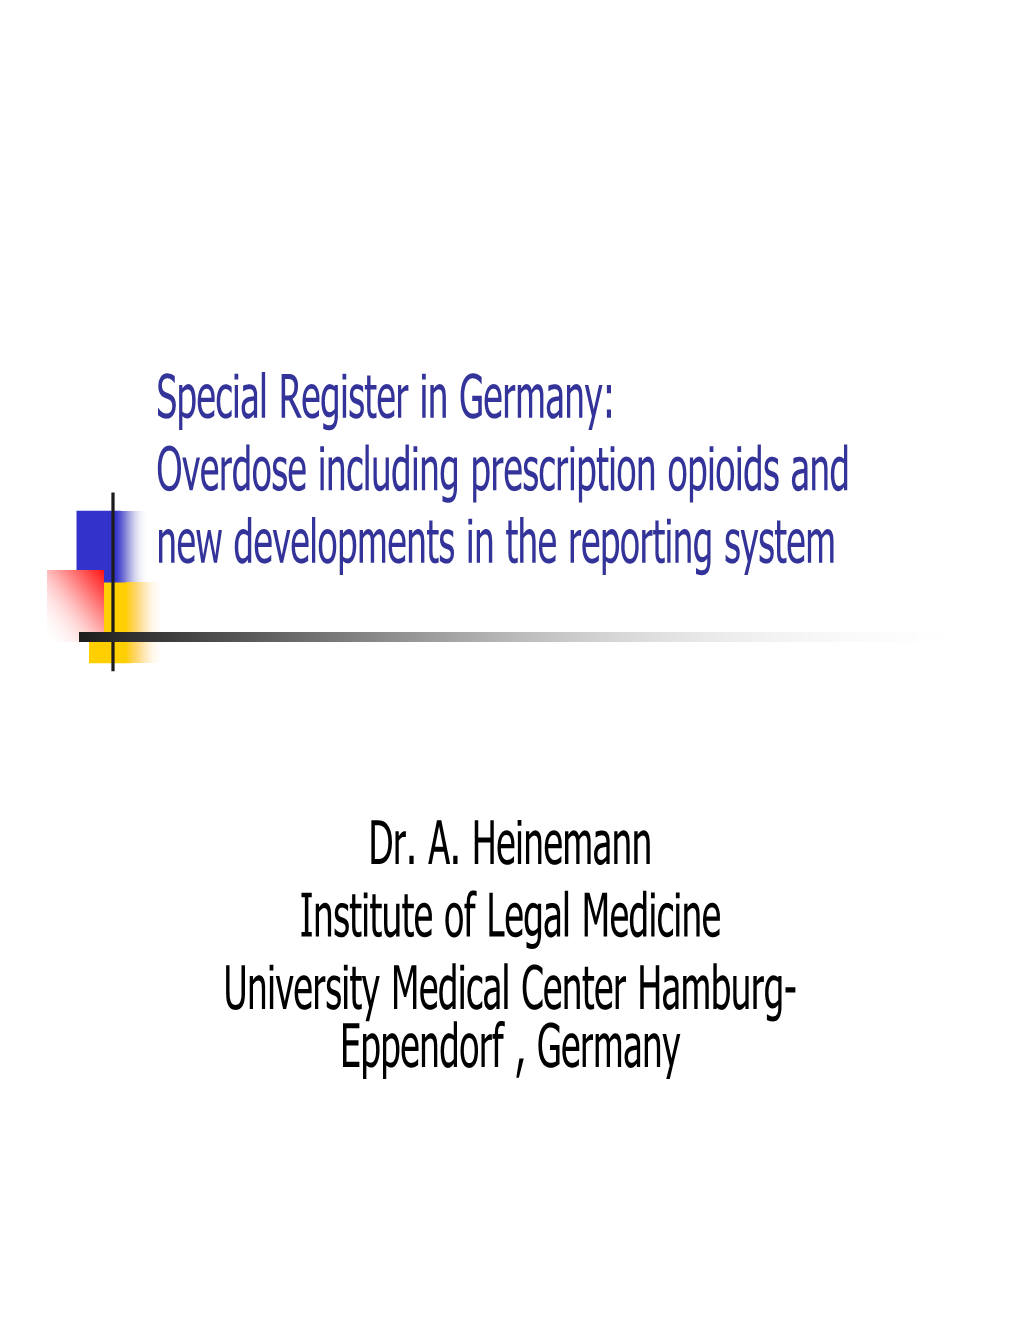 Special Register in Germany: Overdose Including Prescription Opioids and New Developments in the Reporting System